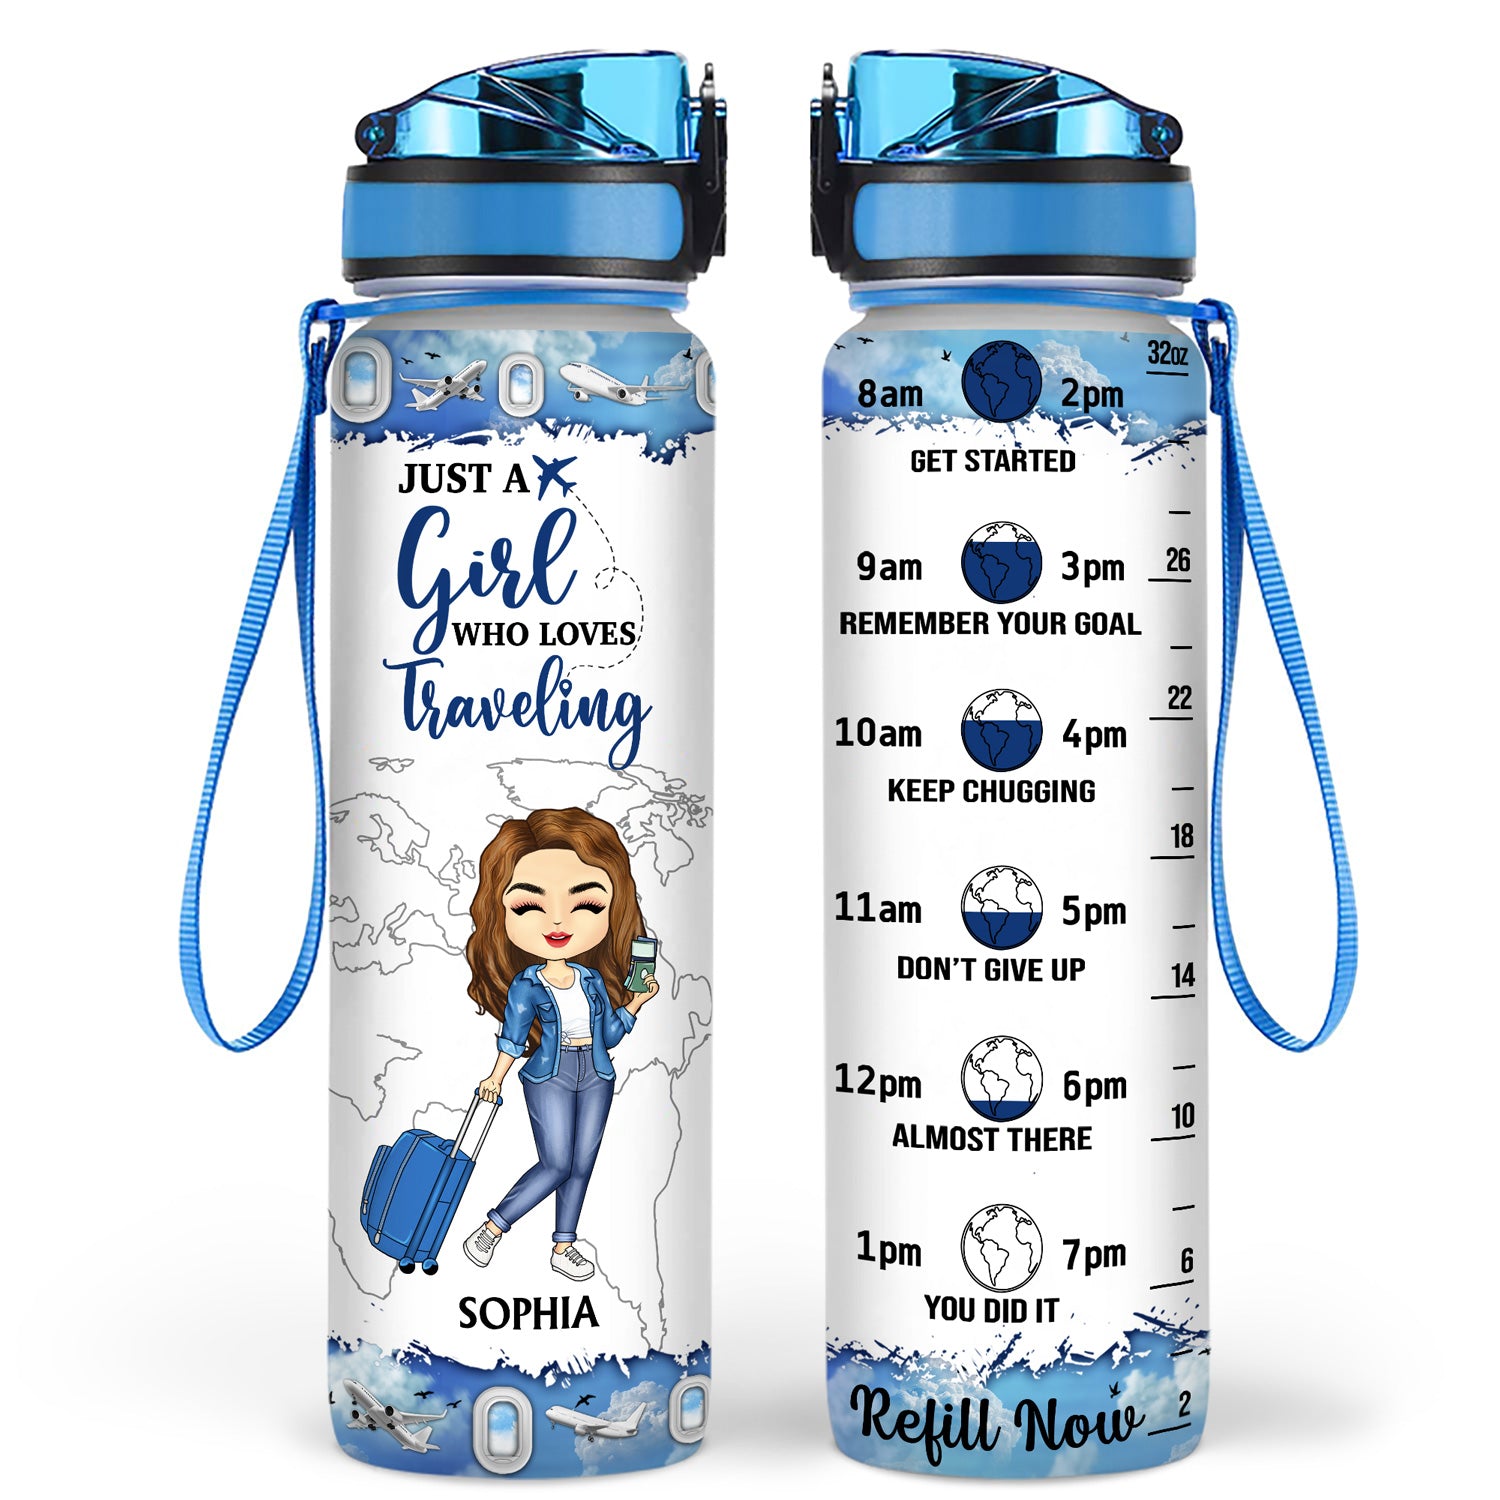 Just A Girl Boy Who Loves Traveling Cruising - Birthday Gift For Him, Her, Trippin', Vacation Lovers - Personalized Custom Water Tracker Bottle